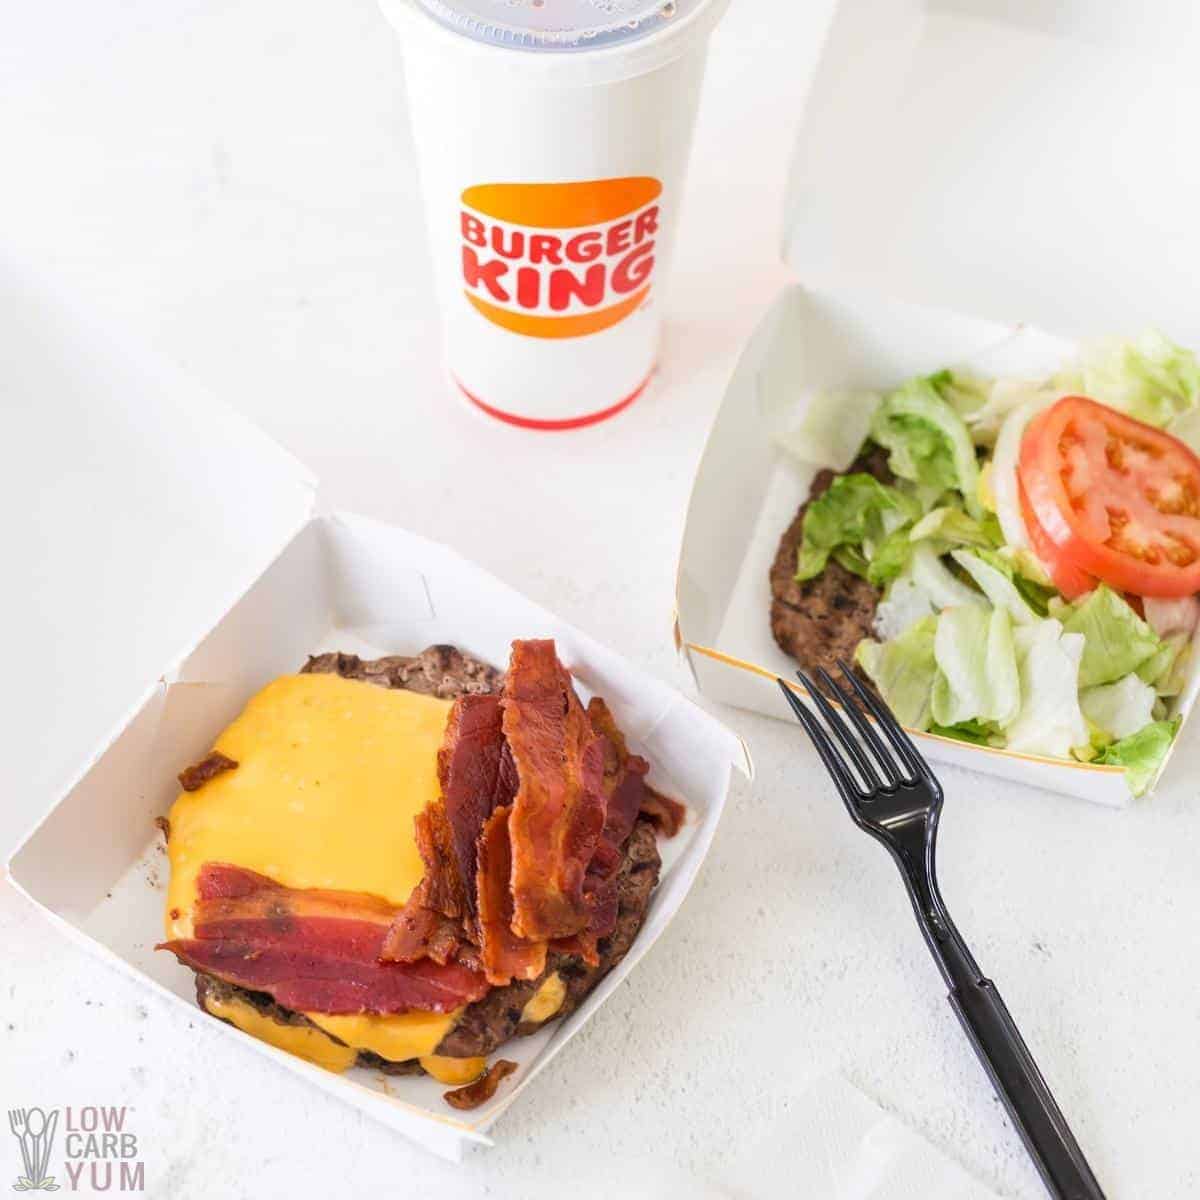 burger king keto options with diet drink.